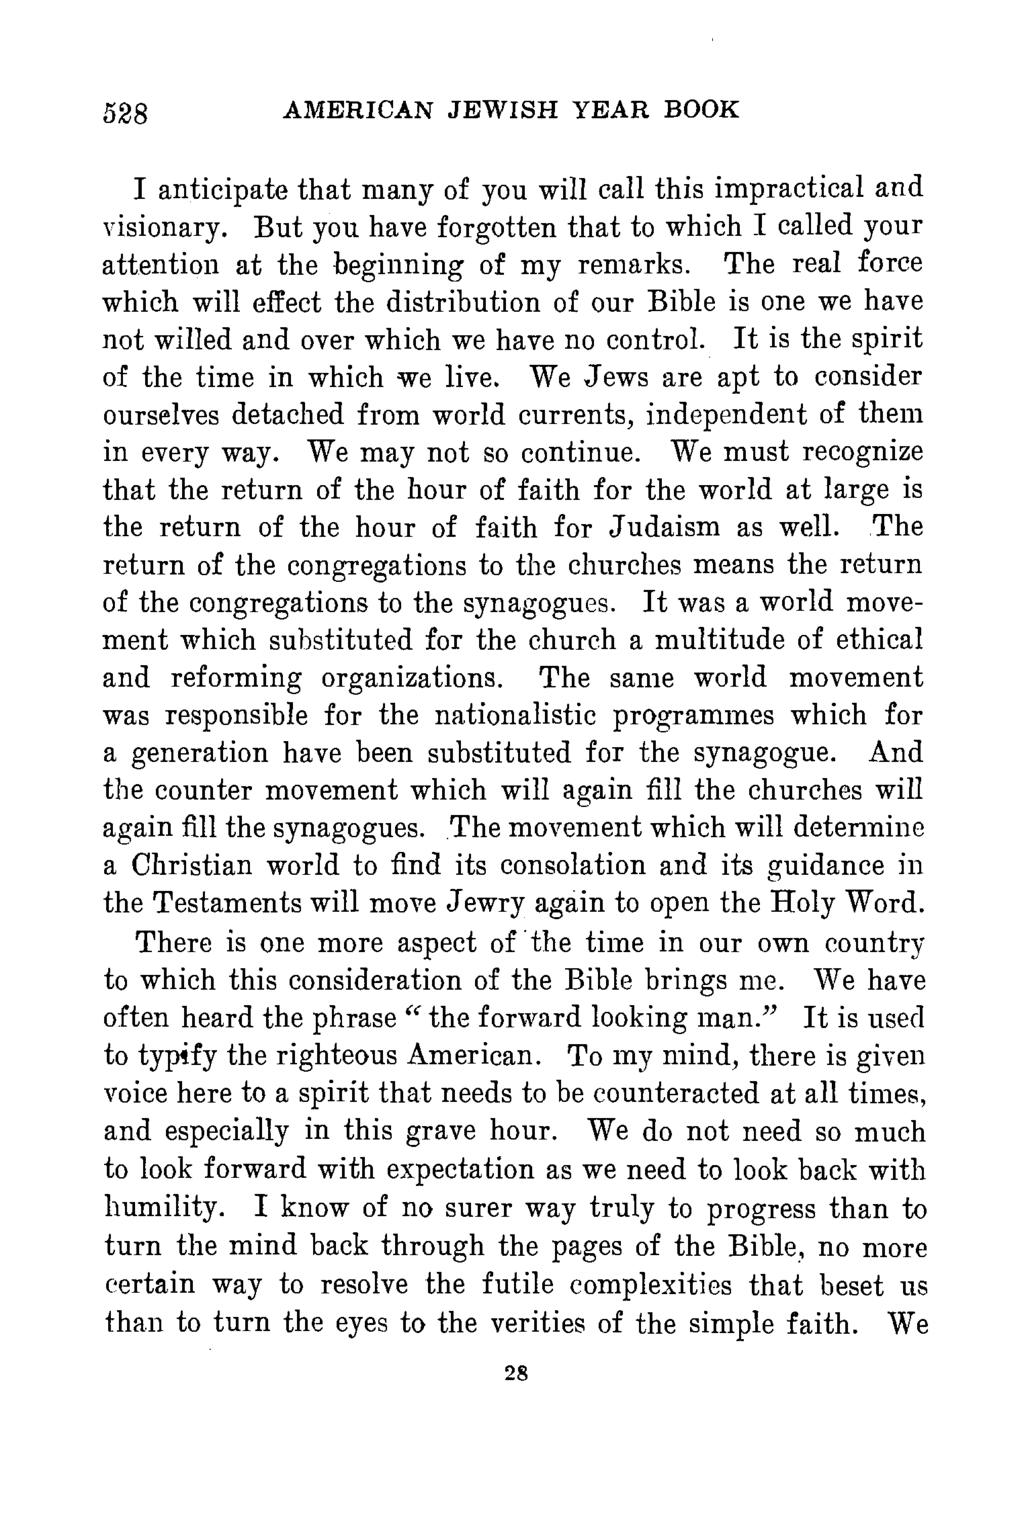 528 AMERICAN JEWISH YEAR BOOK I anticipate that many of you will call this impractical and visionary. But you have forgotten that to which I called your attention at the beginning of my remarks.